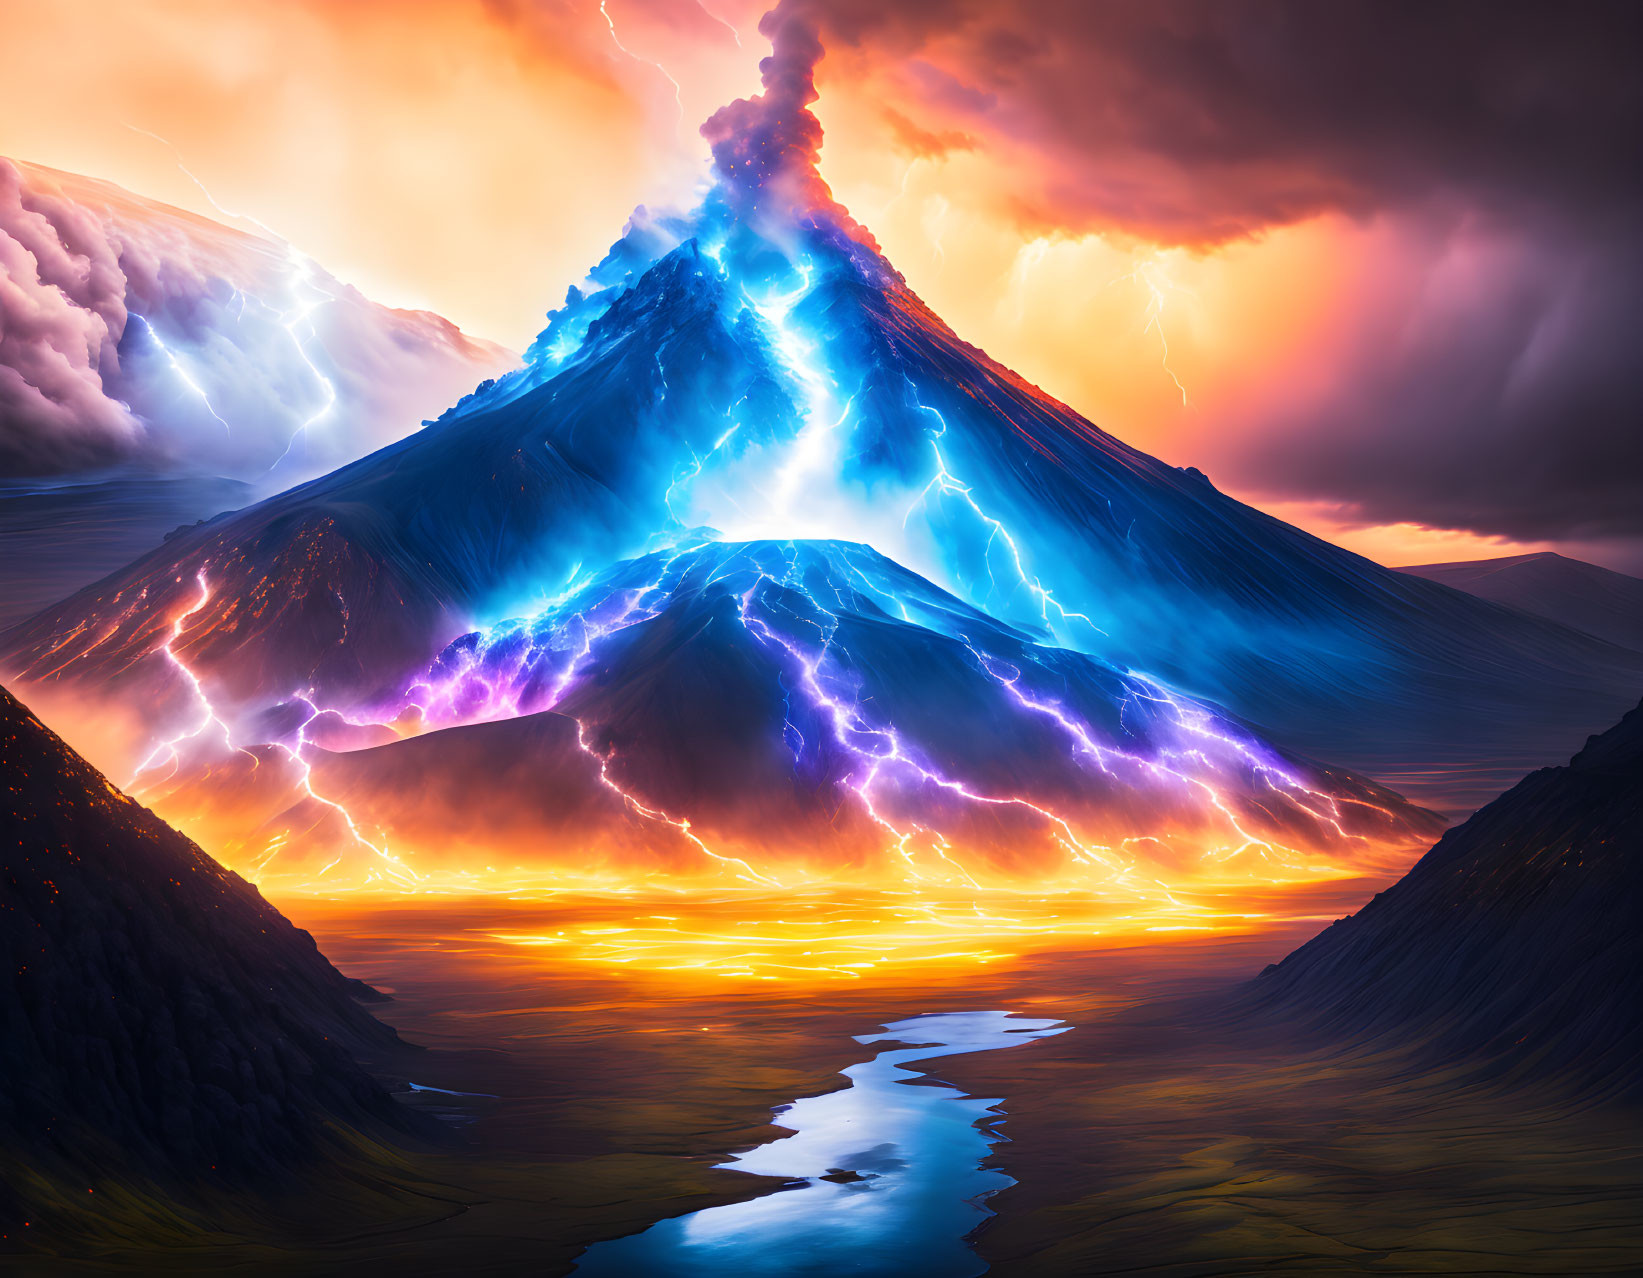 Erupting volcano with lightning in fiery landscape and reflective river